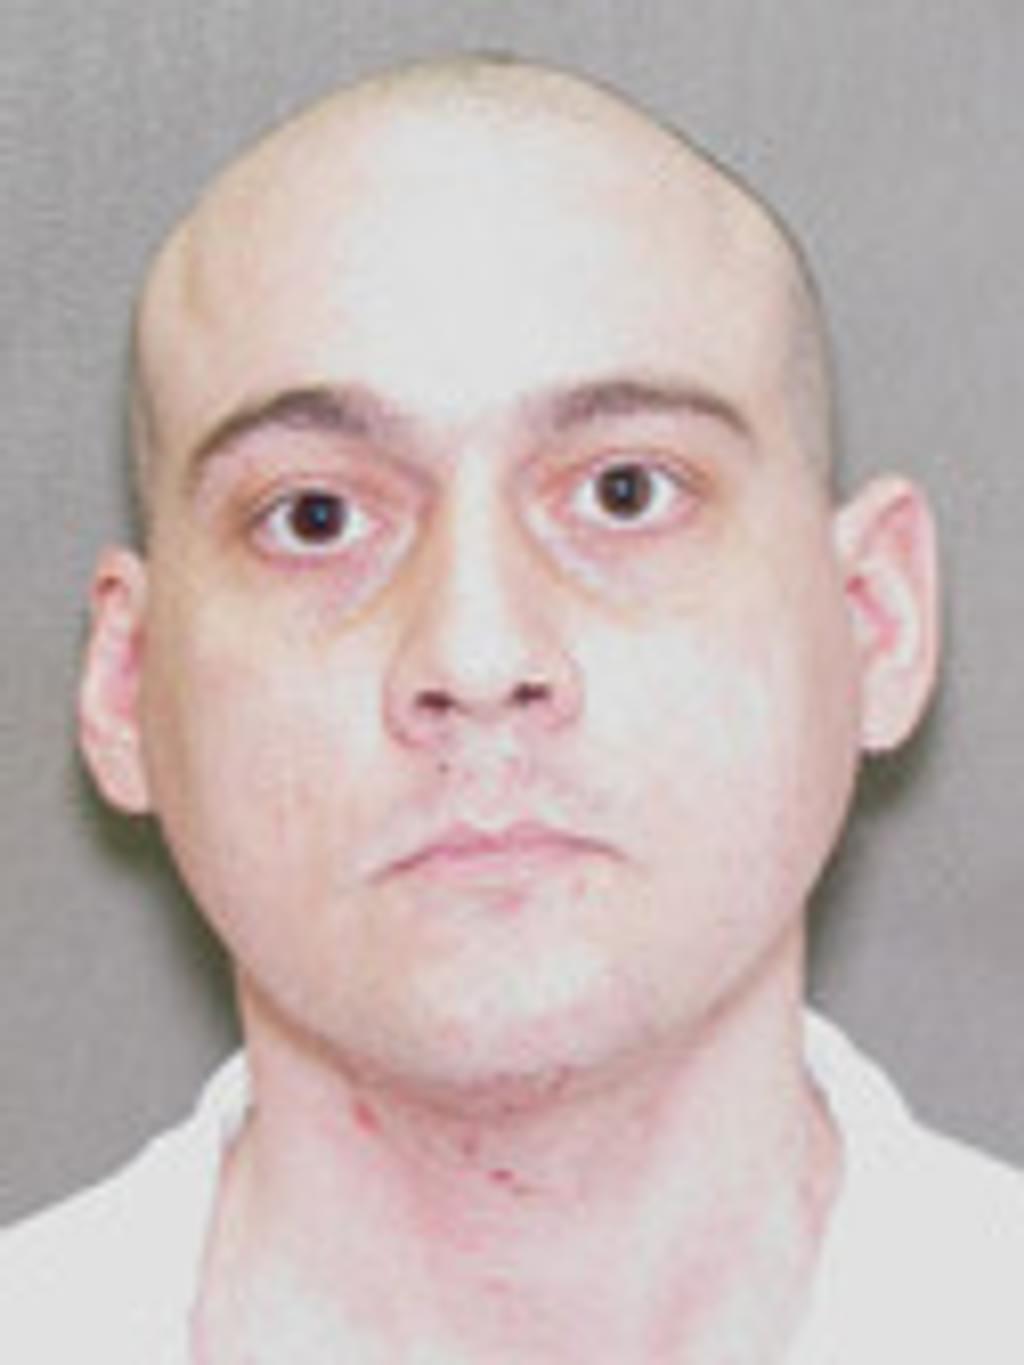 Picasso renhed søvn Texas Court Issues 60-Day Stay of Execution for John Hummel in Response to  Coronavirus Crisis | Death Penalty Information Center